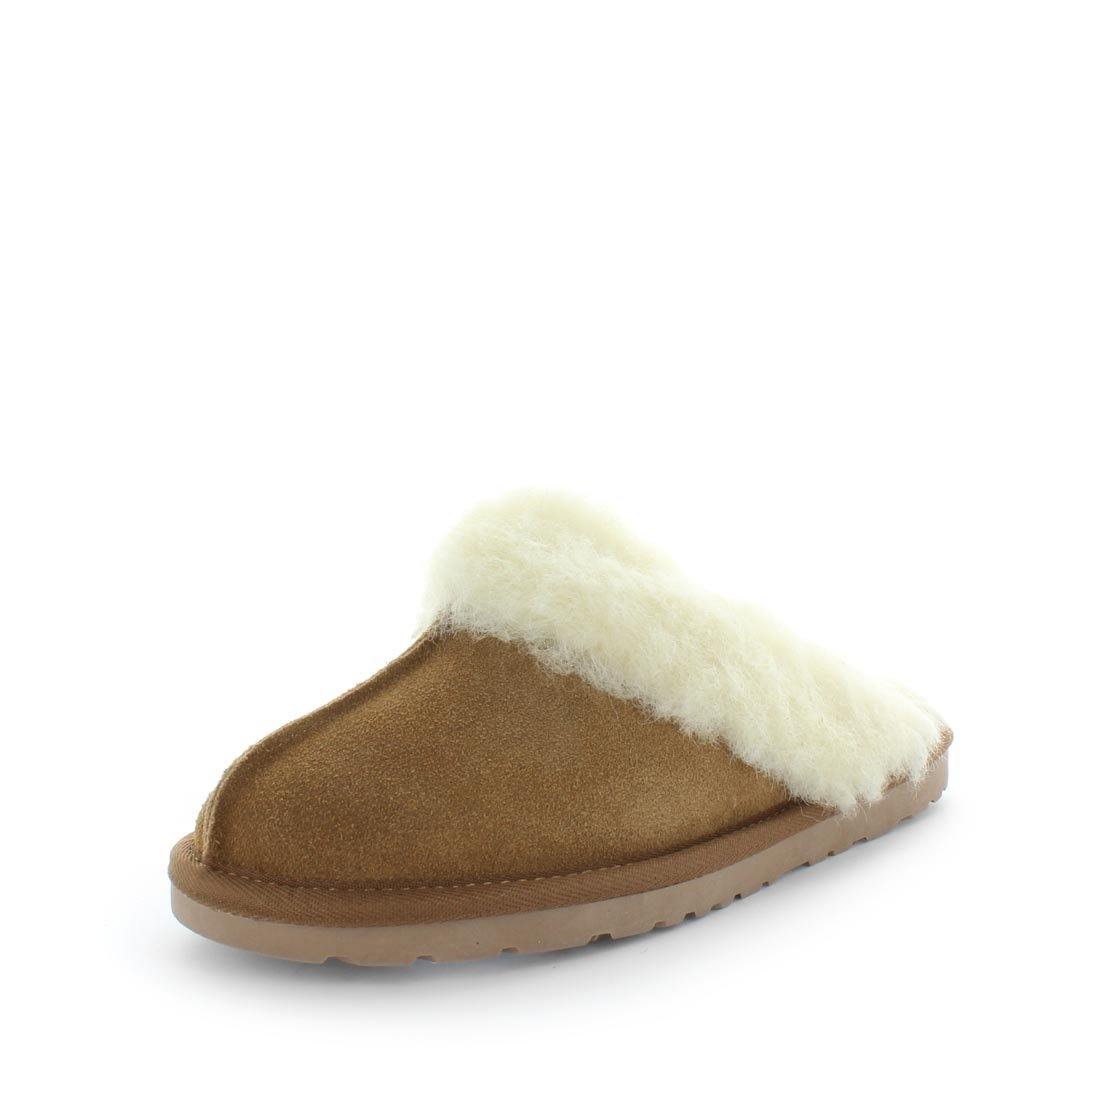 Just Bee UGGs- cita- womens little slip-on slipper style, 100% wool, leather shoe with detailed upper and over hanging wool on the trim - womens comfort slippers - womens best slippers- UGGs